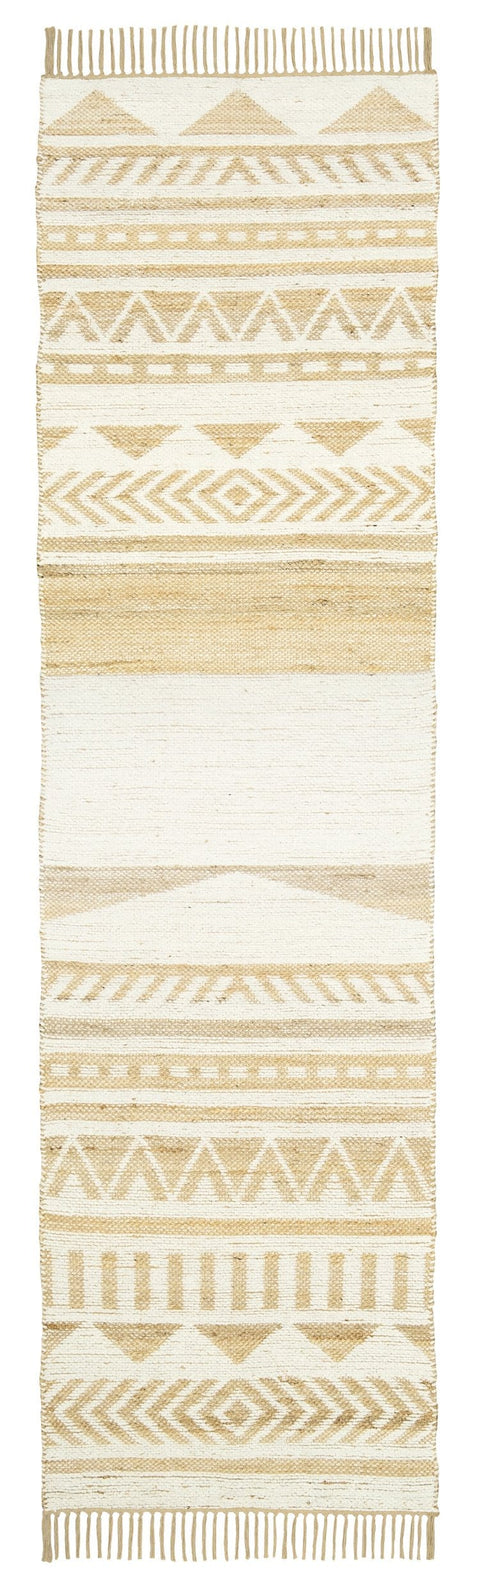 Marilia White and Natural Runner Rug *NO RETURNS UNLESS FAULTY